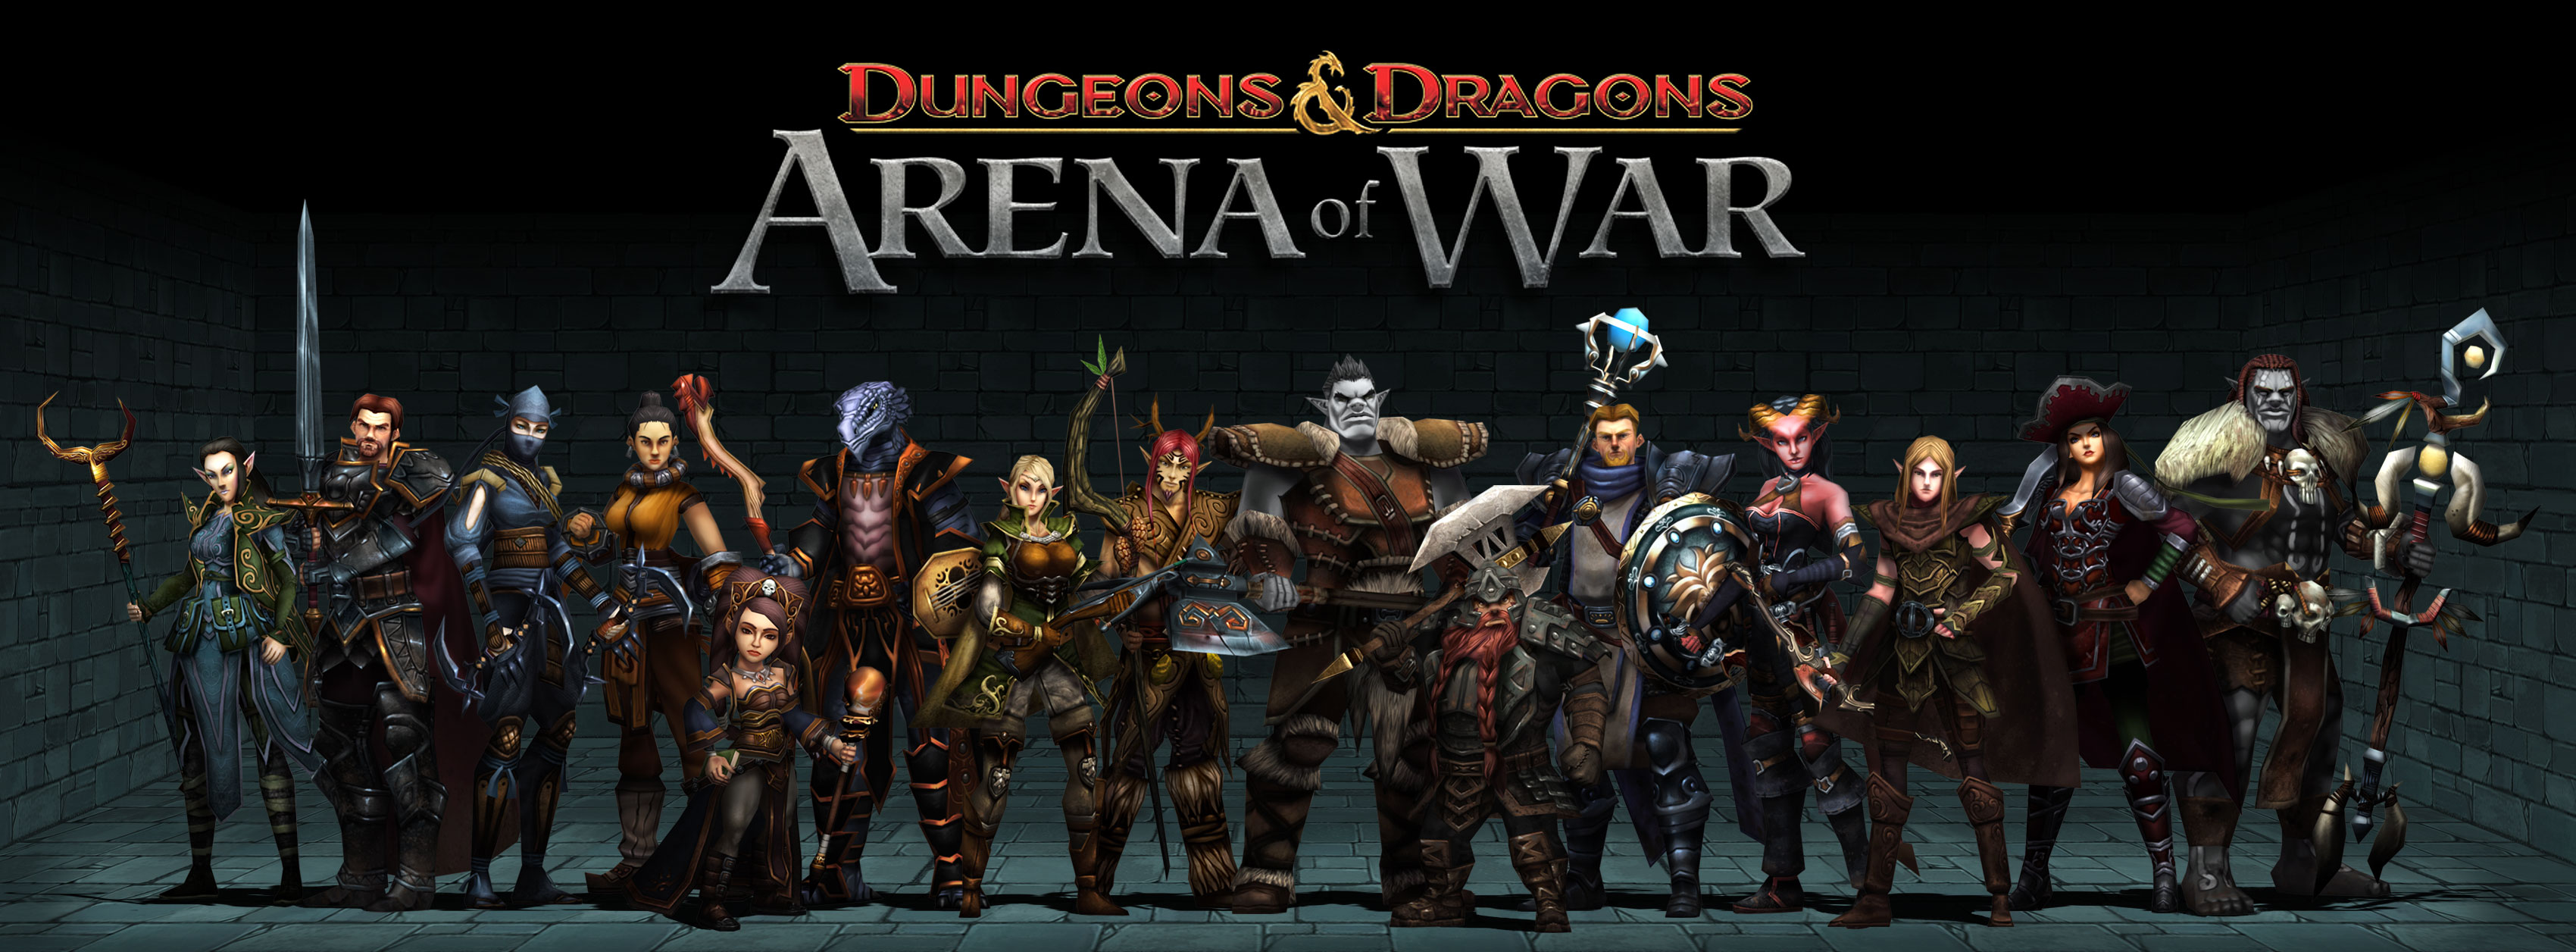 Dungeons-and-Dragons-Arena-of-War-06